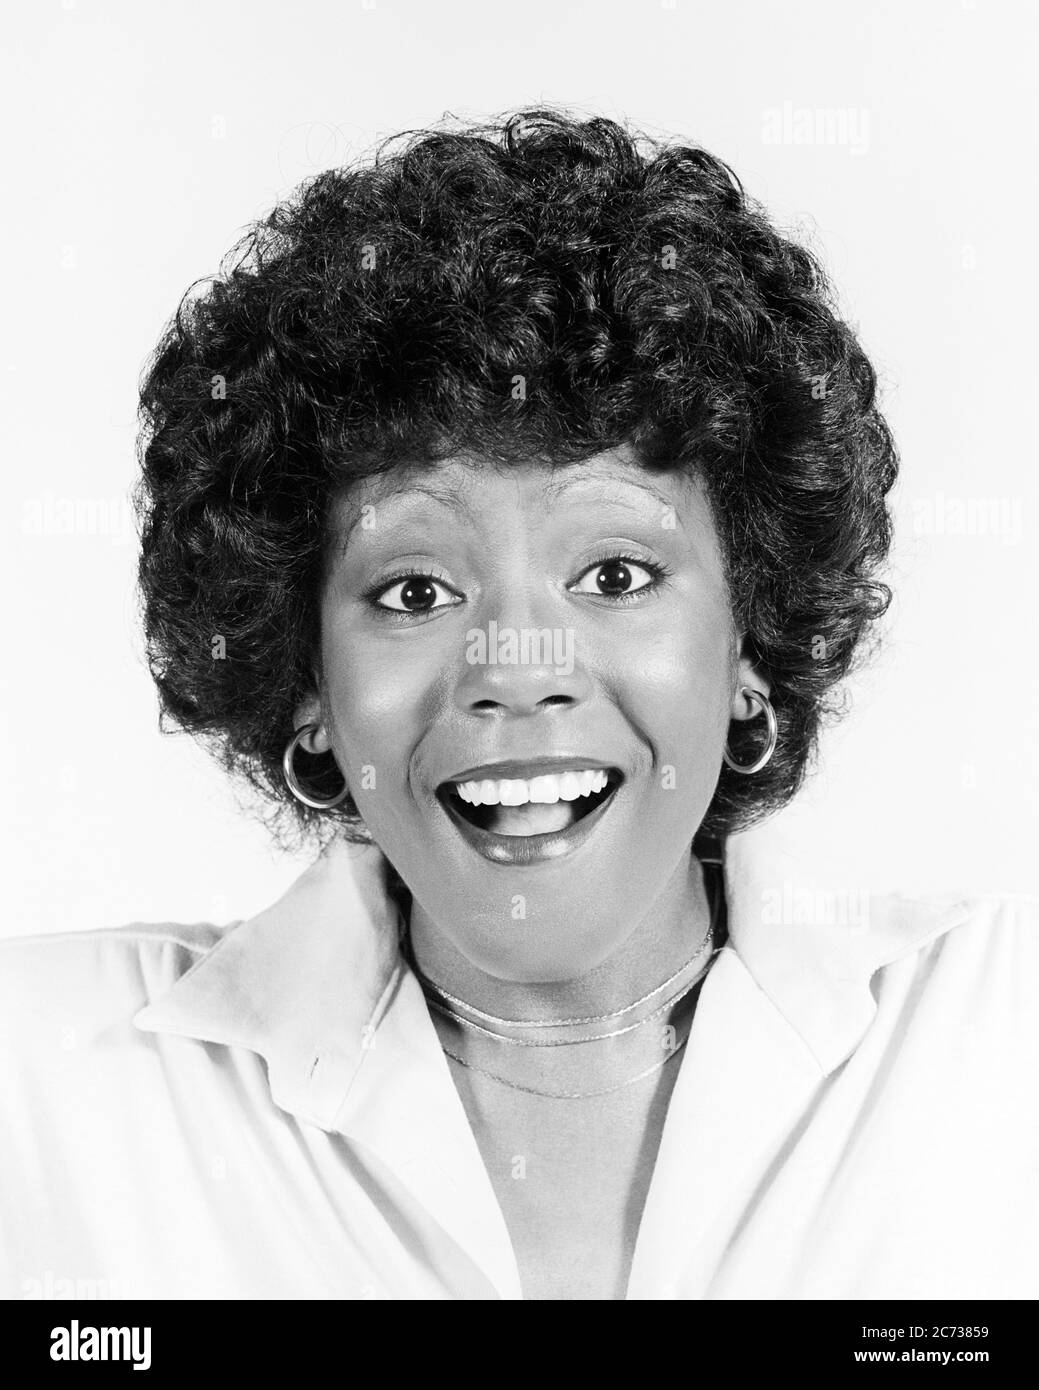 1970s WIDE-EYED LAUGHING ENTHUSIASTIC AFRICAN-AMERICAN WOMAN NATURAL HAIRSTYLE LOOKING AT CAMERA - g8617 HAR001 HARS EYE CONTACT BUG-EYED HAPPINESS HEAD AND SHOULDERS CHEERFUL AFRICAN-AMERICANS AFRICAN-AMERICAN EXCITEMENT HAIRSTYLE BLACK ETHNICITY ENTHUSIASTIC NATURAL SMILES CONCEPTUAL CHEERY JOYFUL LAUGHTER WIDE-EYED YOUNG ADULT WOMAN BLACK AND WHITE EXUBERANT HAR001 MOUTH OPEN OLD FASHIONED AFRICAN AMERICANS Stock Photo